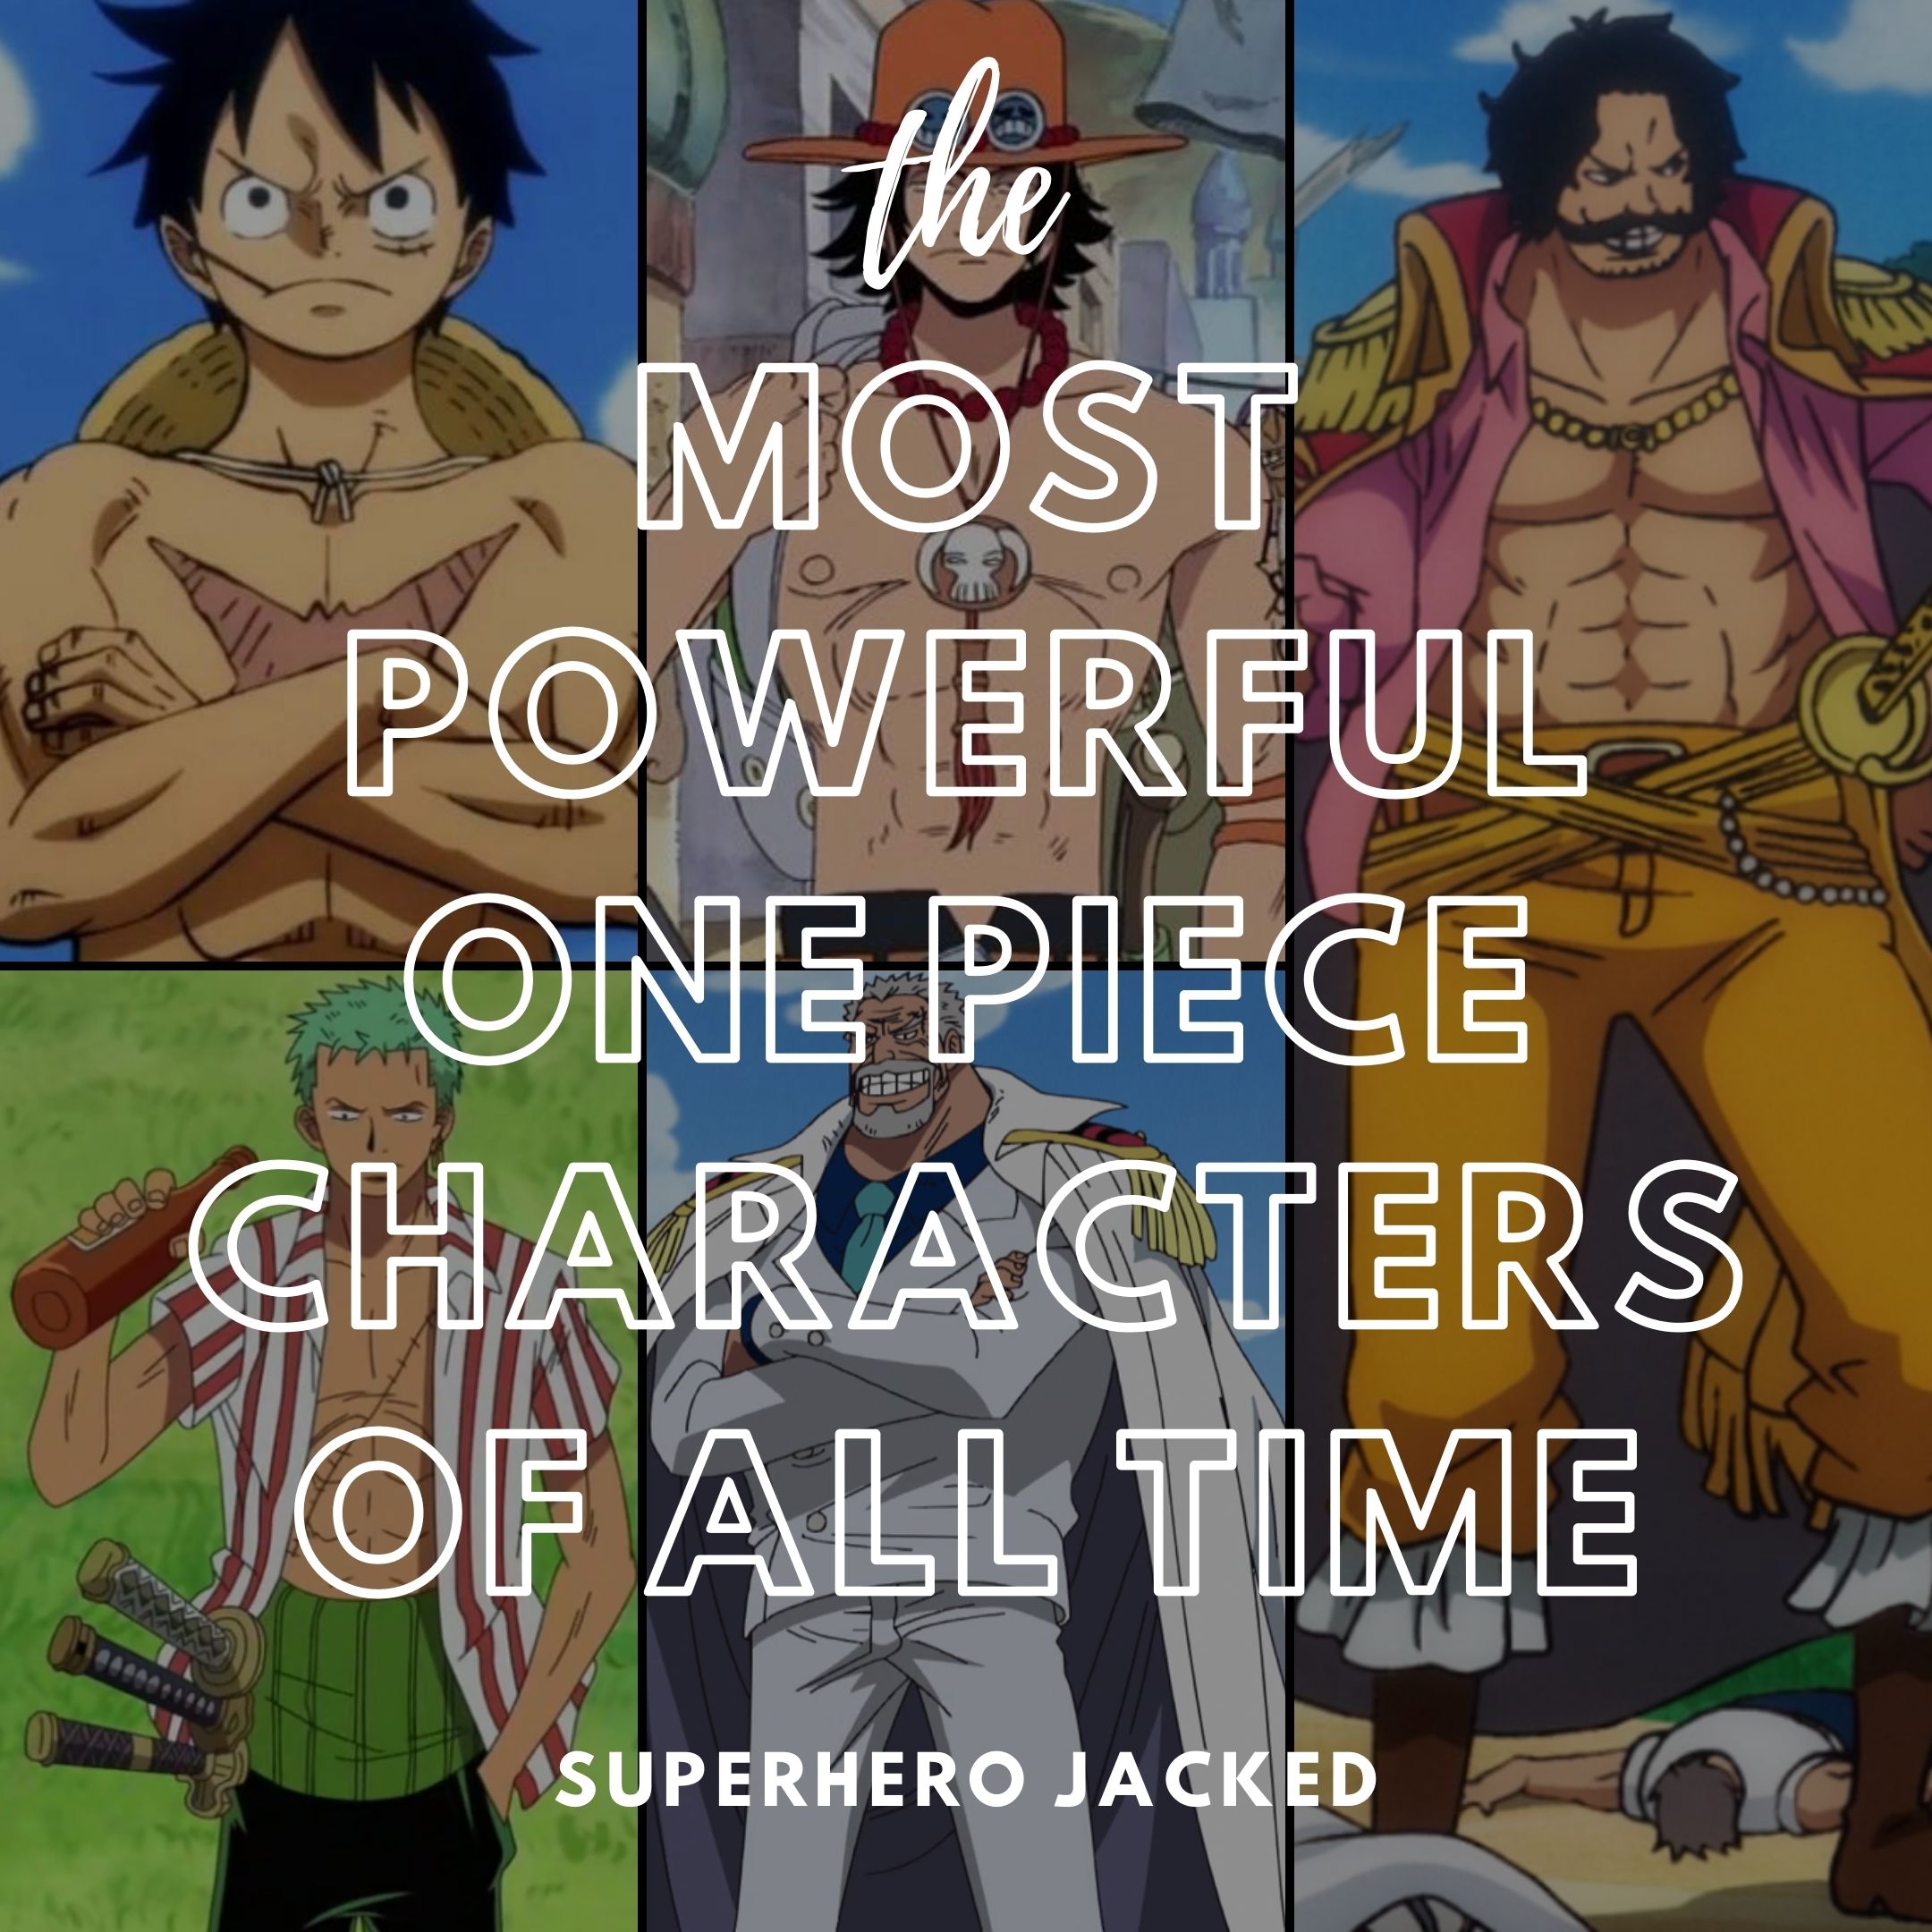 One piece top 15 strongest characters all time - Gen. Discussion